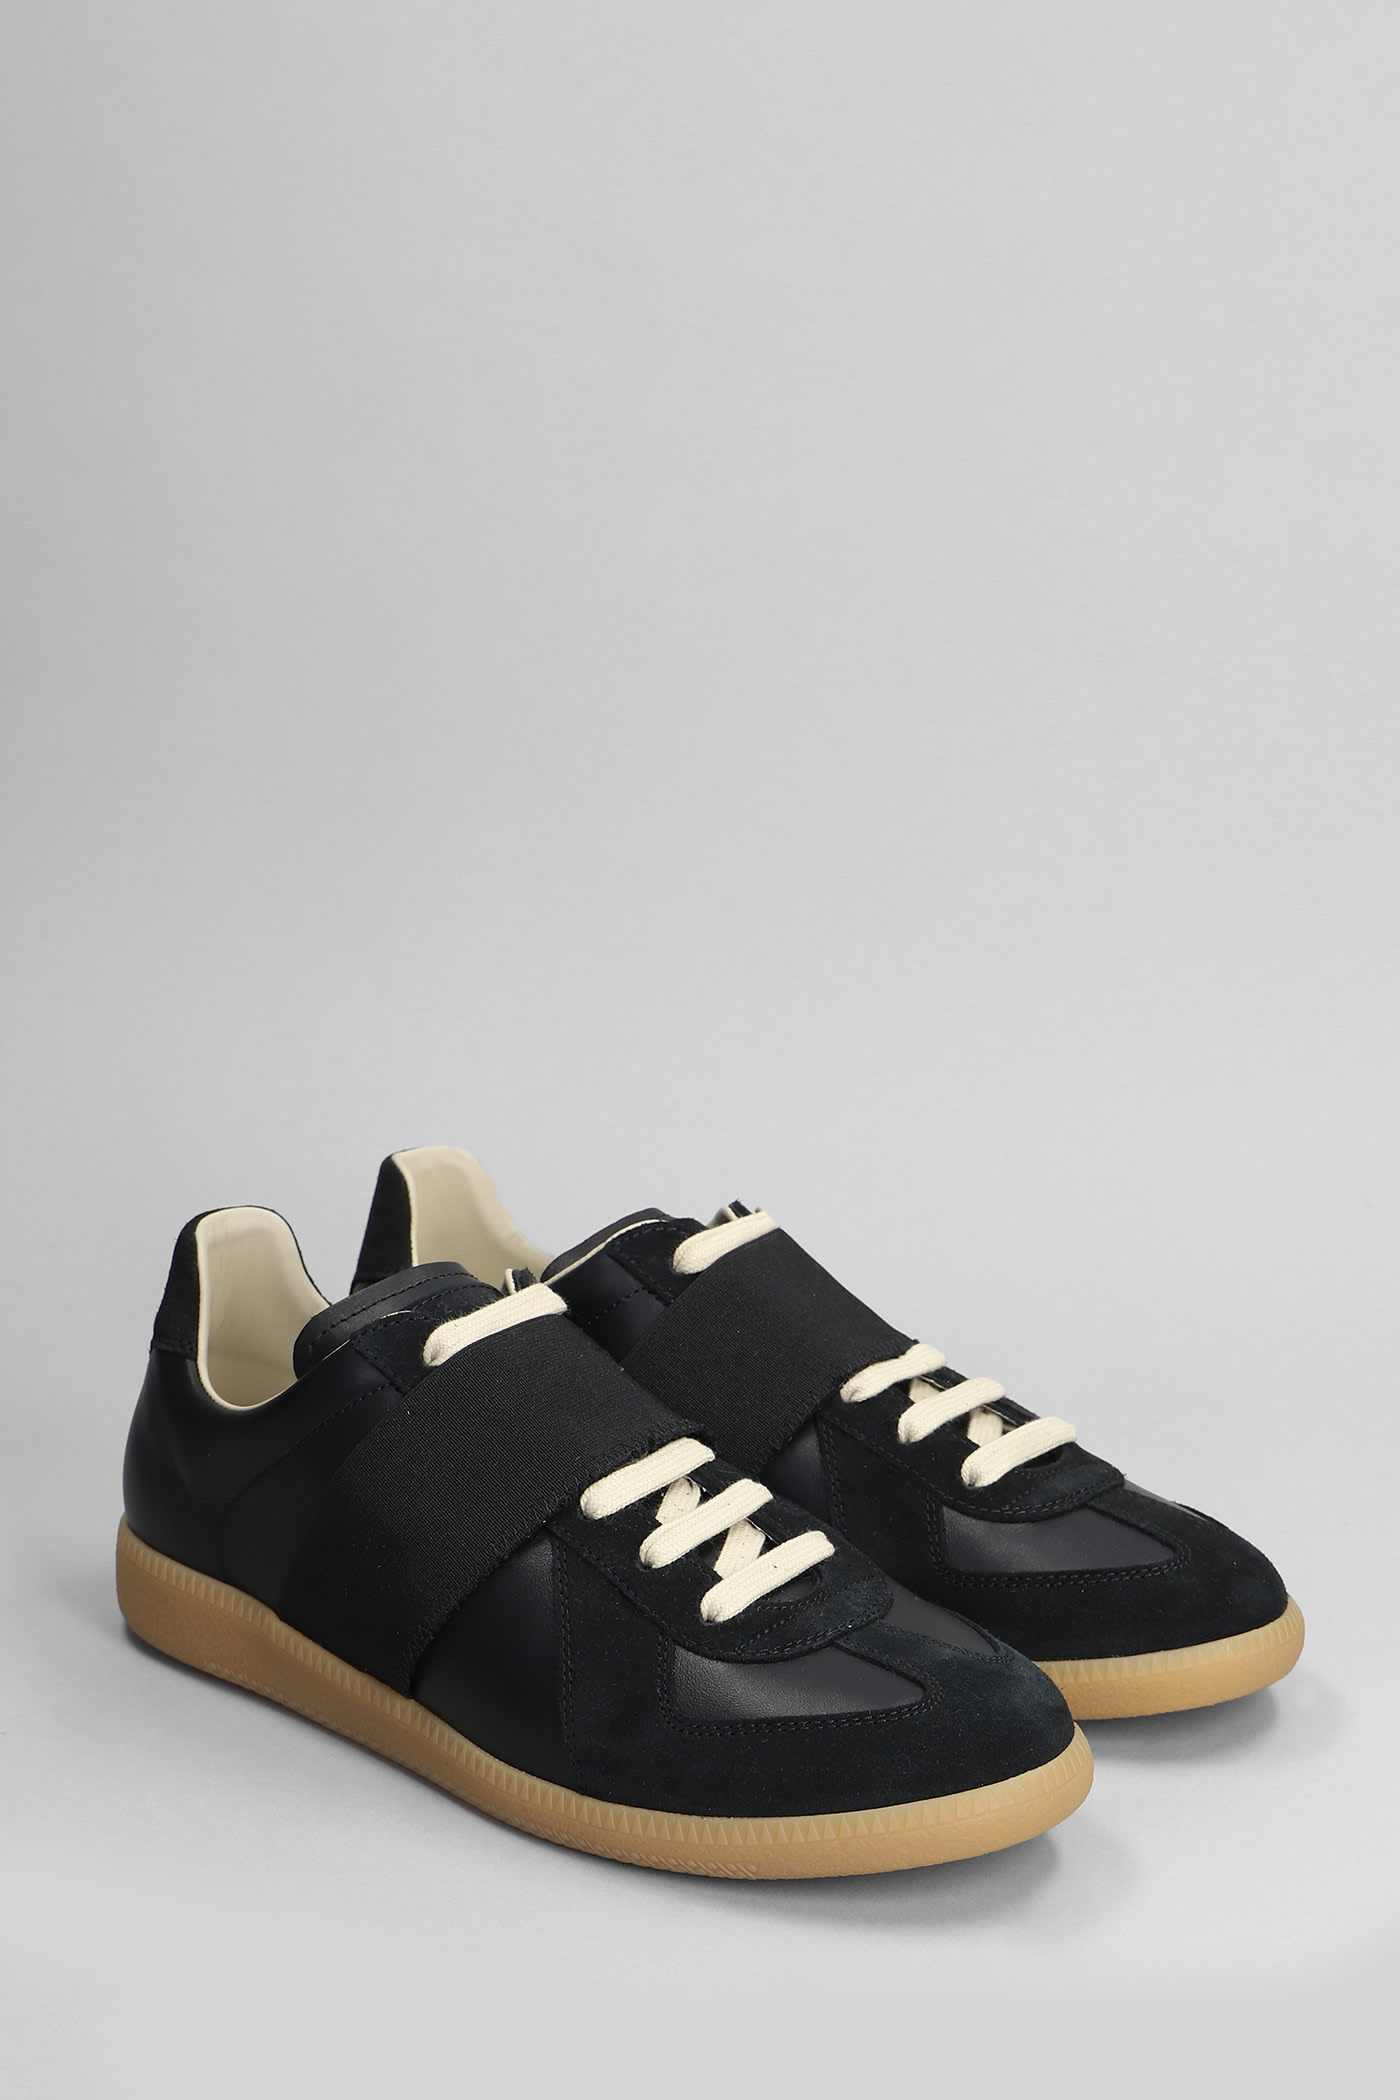 Shop Maison Margiela Replica Sneakers In Black Suede And Leather